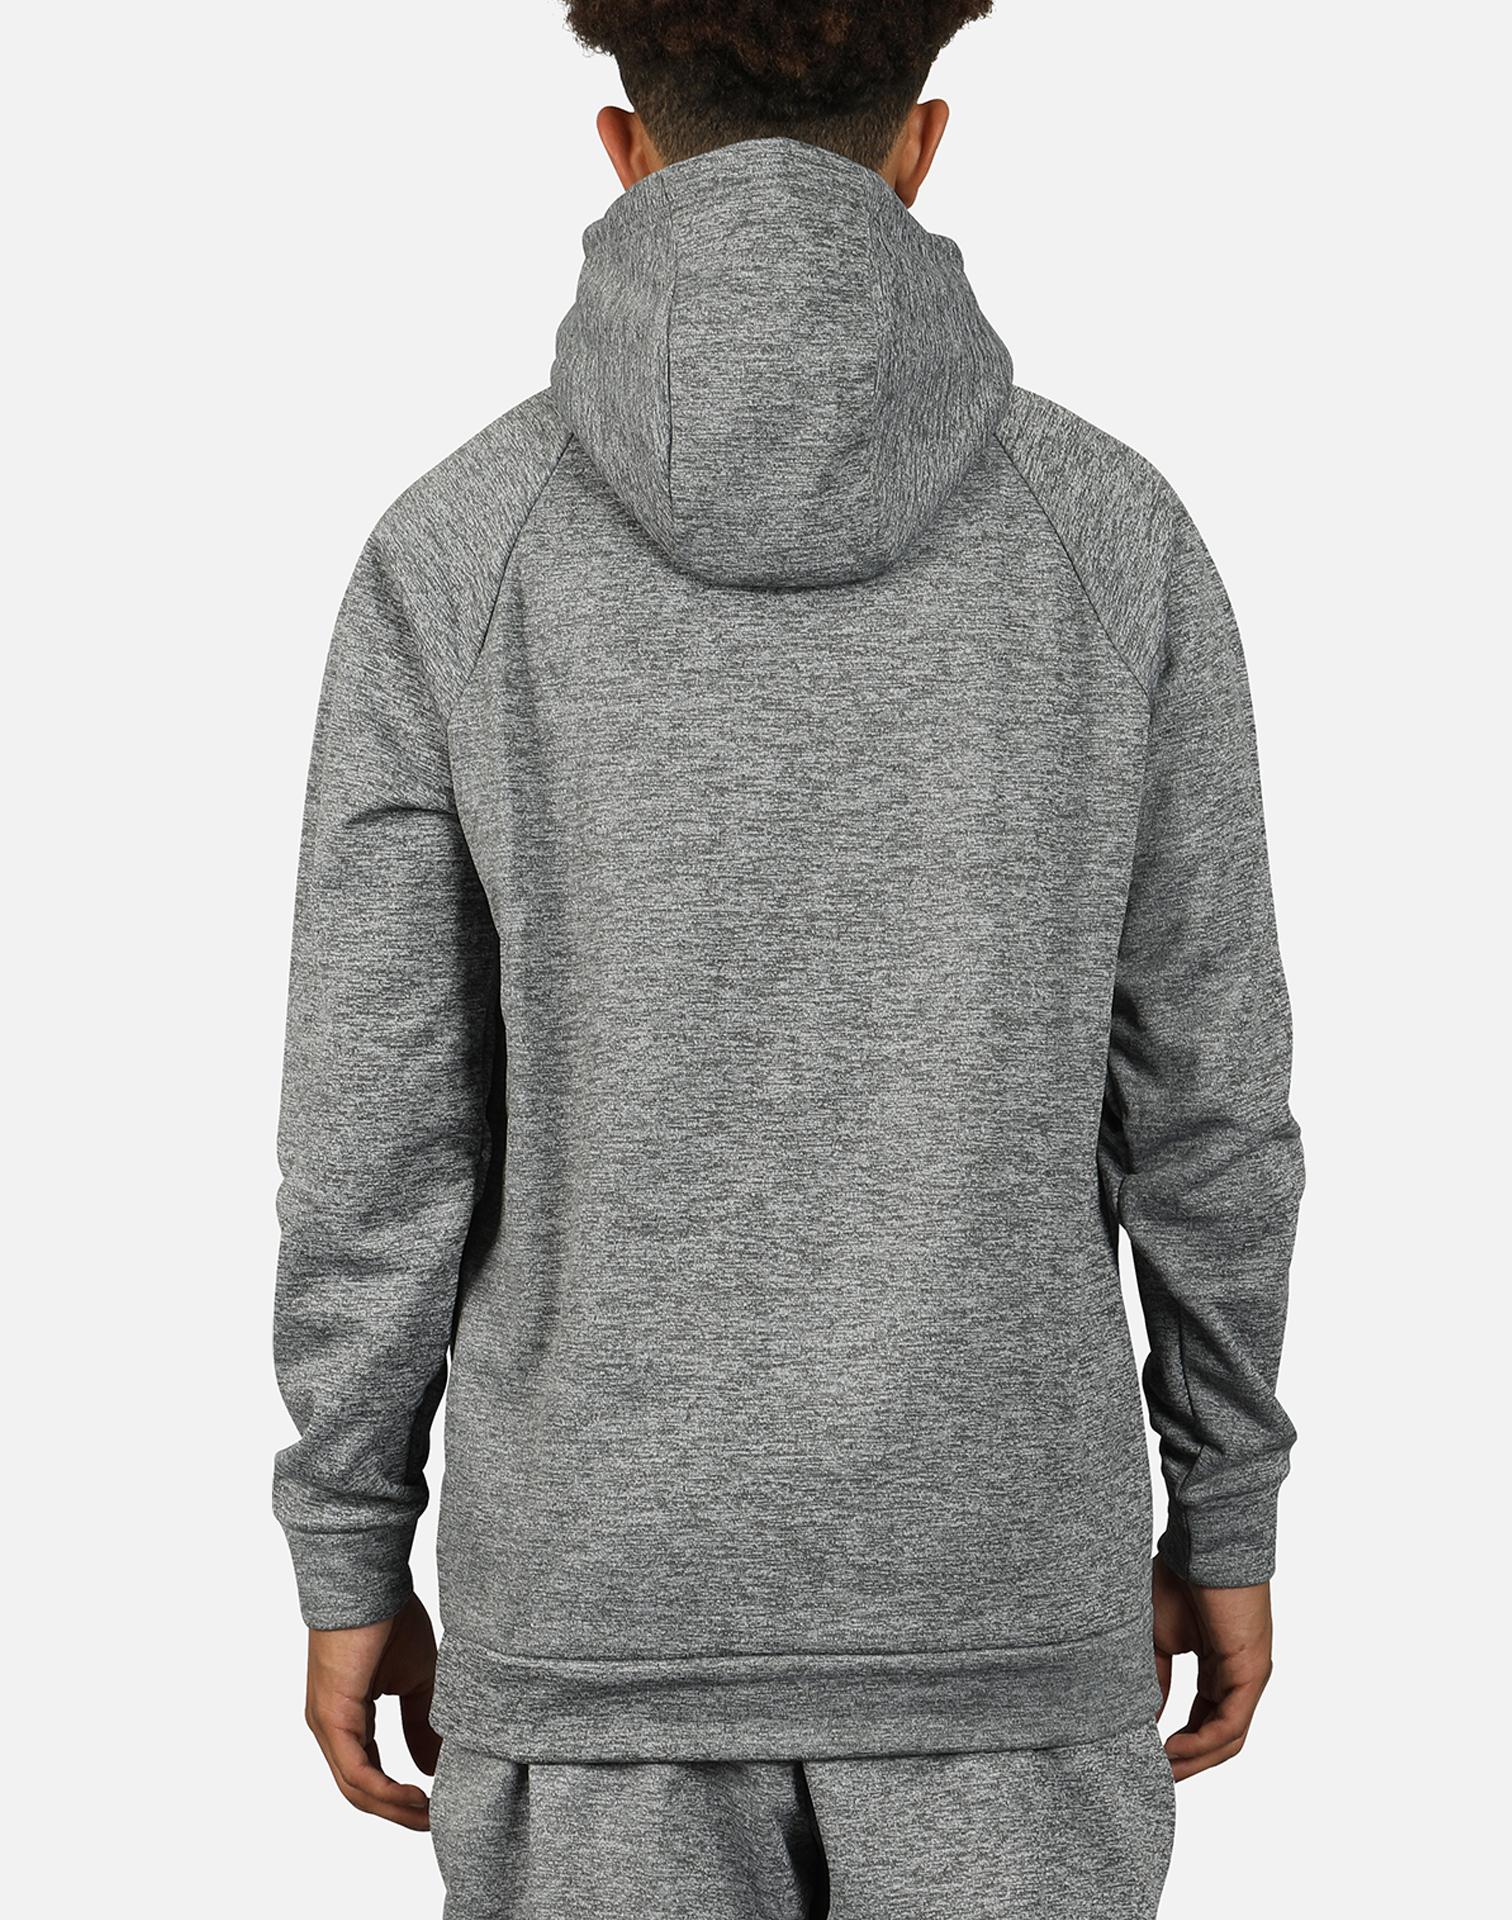 Nike 23 Alpha Thermal Pullover Hoodie in Grey (Gray) for Men - Lyst